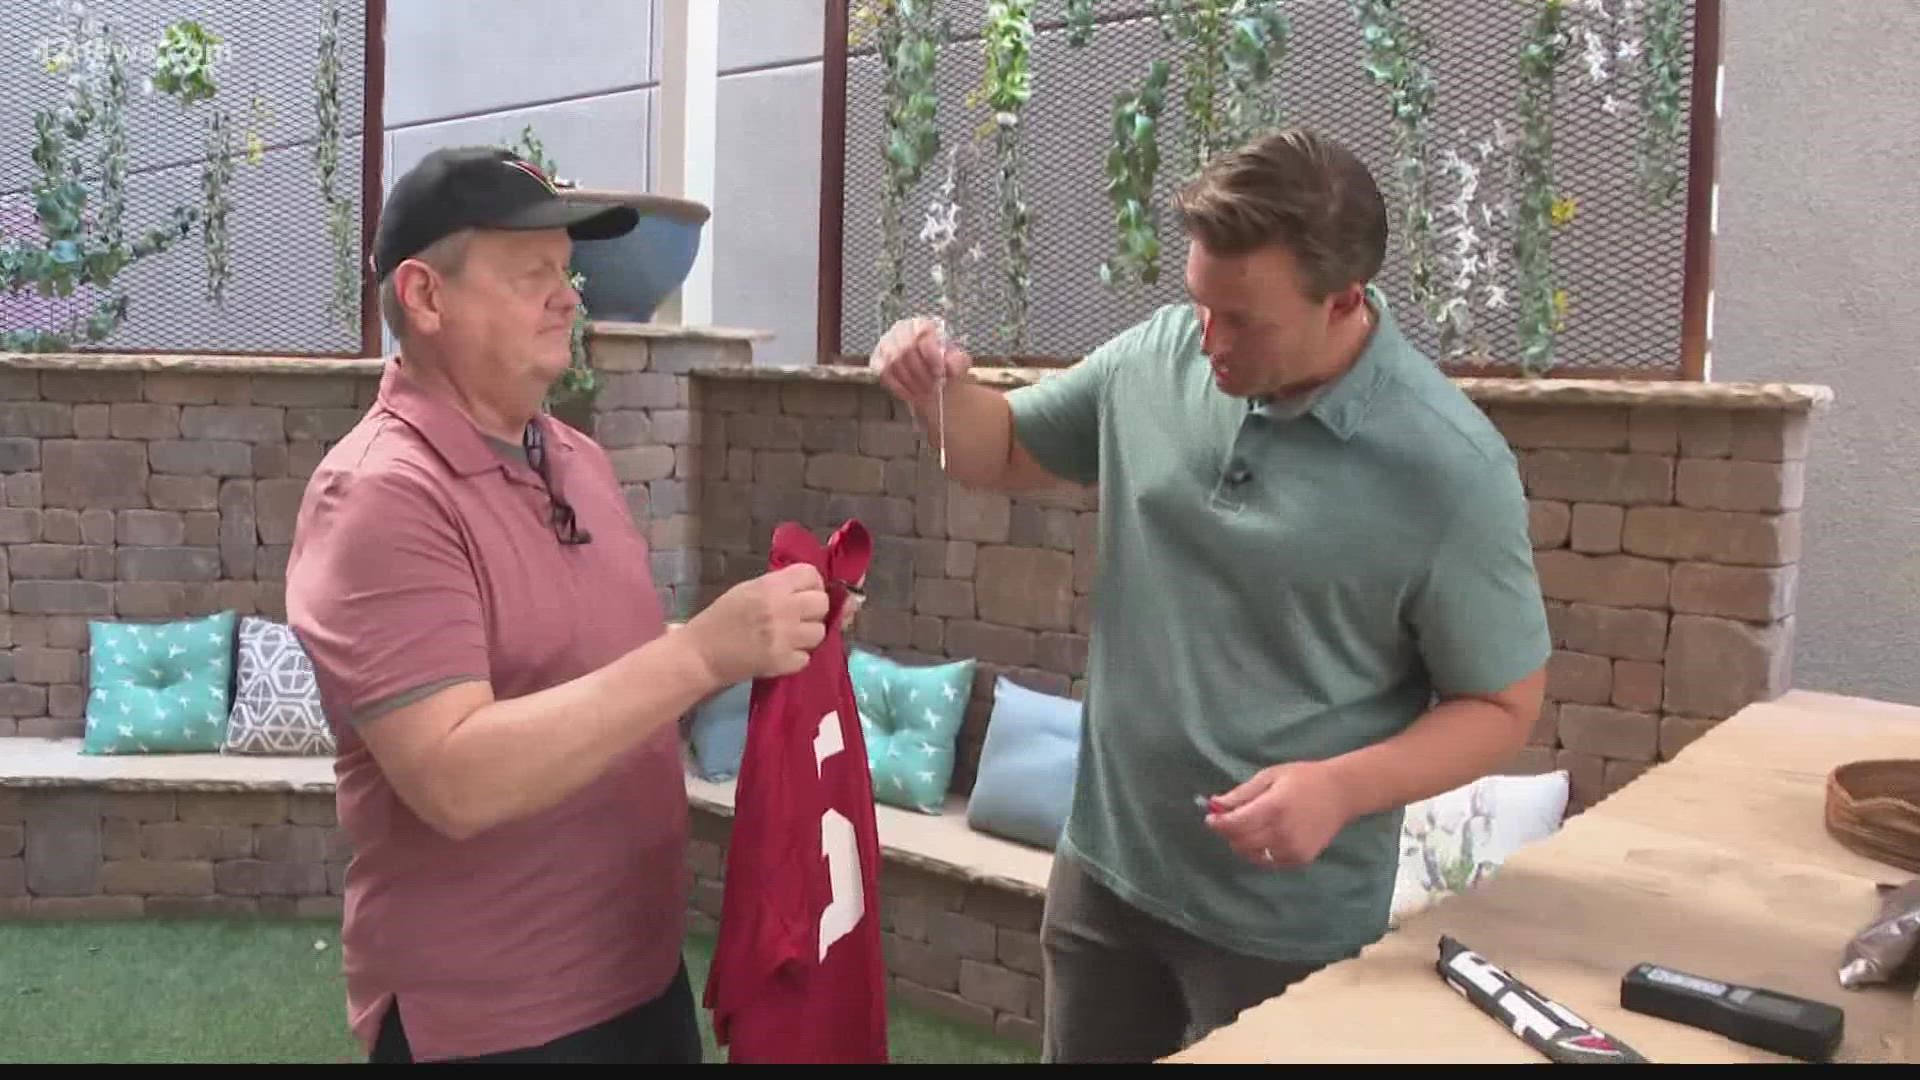 12 News found out how filthy sports jerseys and hats can get if they go unwashed during the off-season.